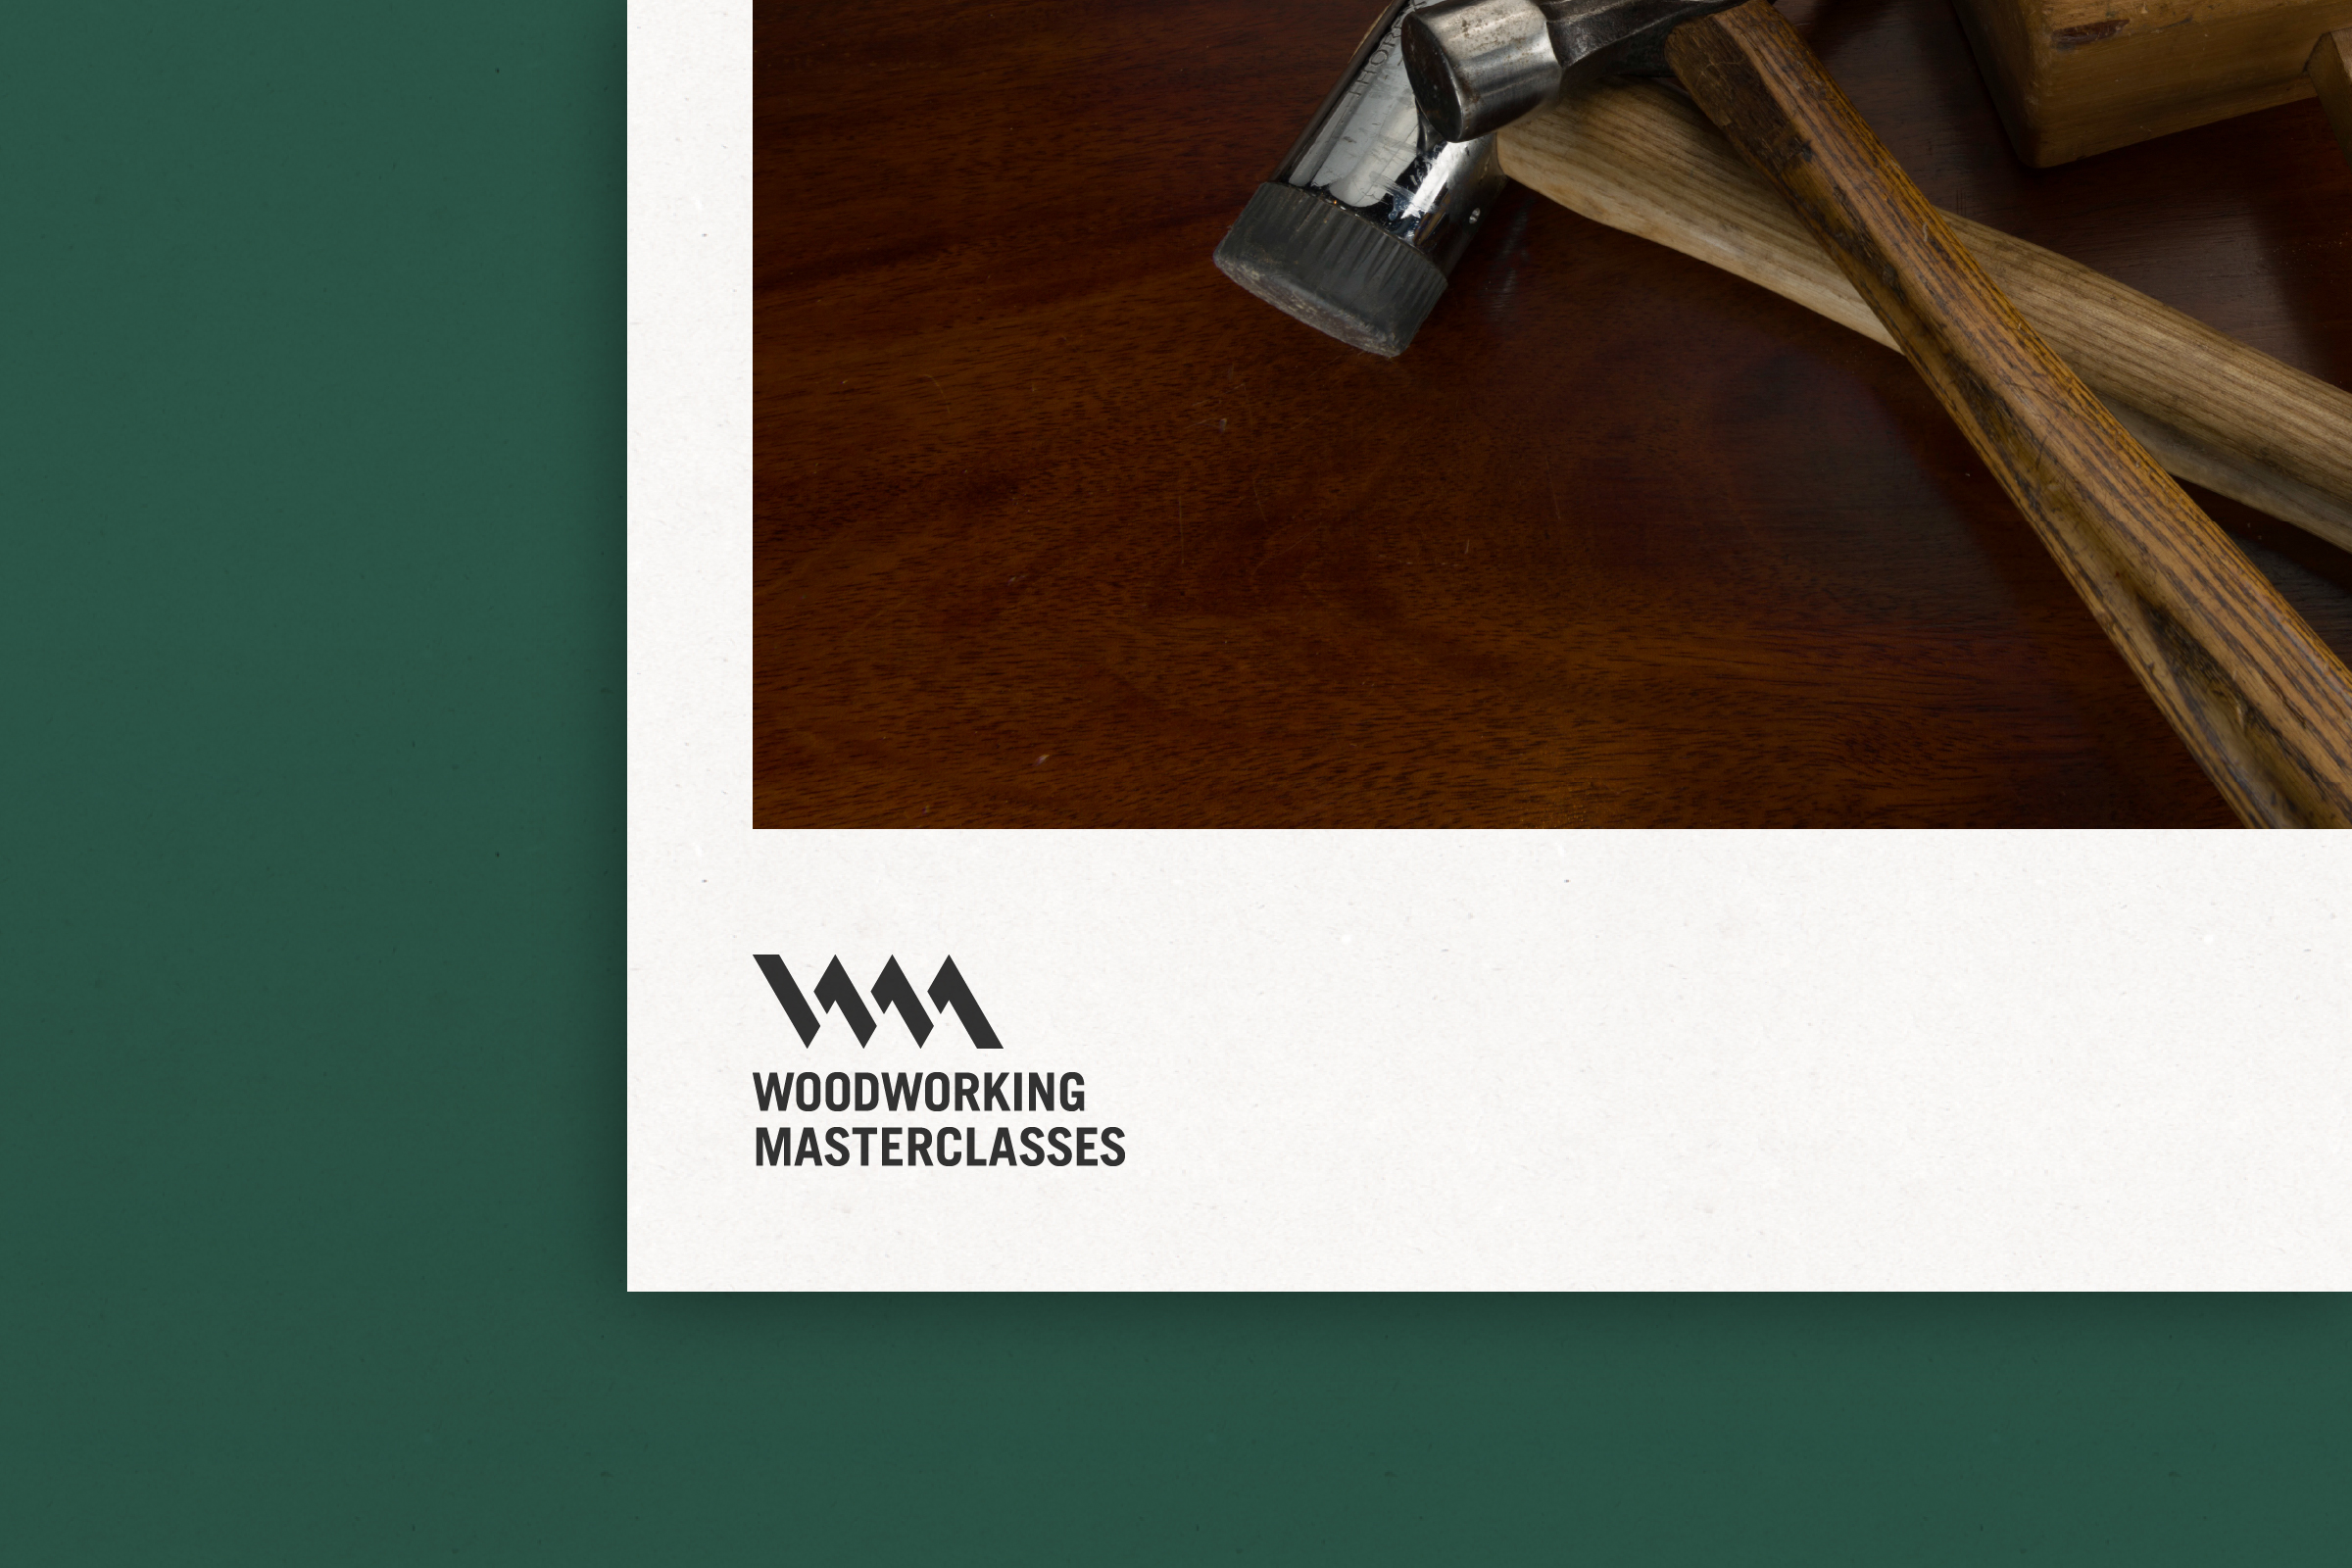 Image of logo for woodworking brand